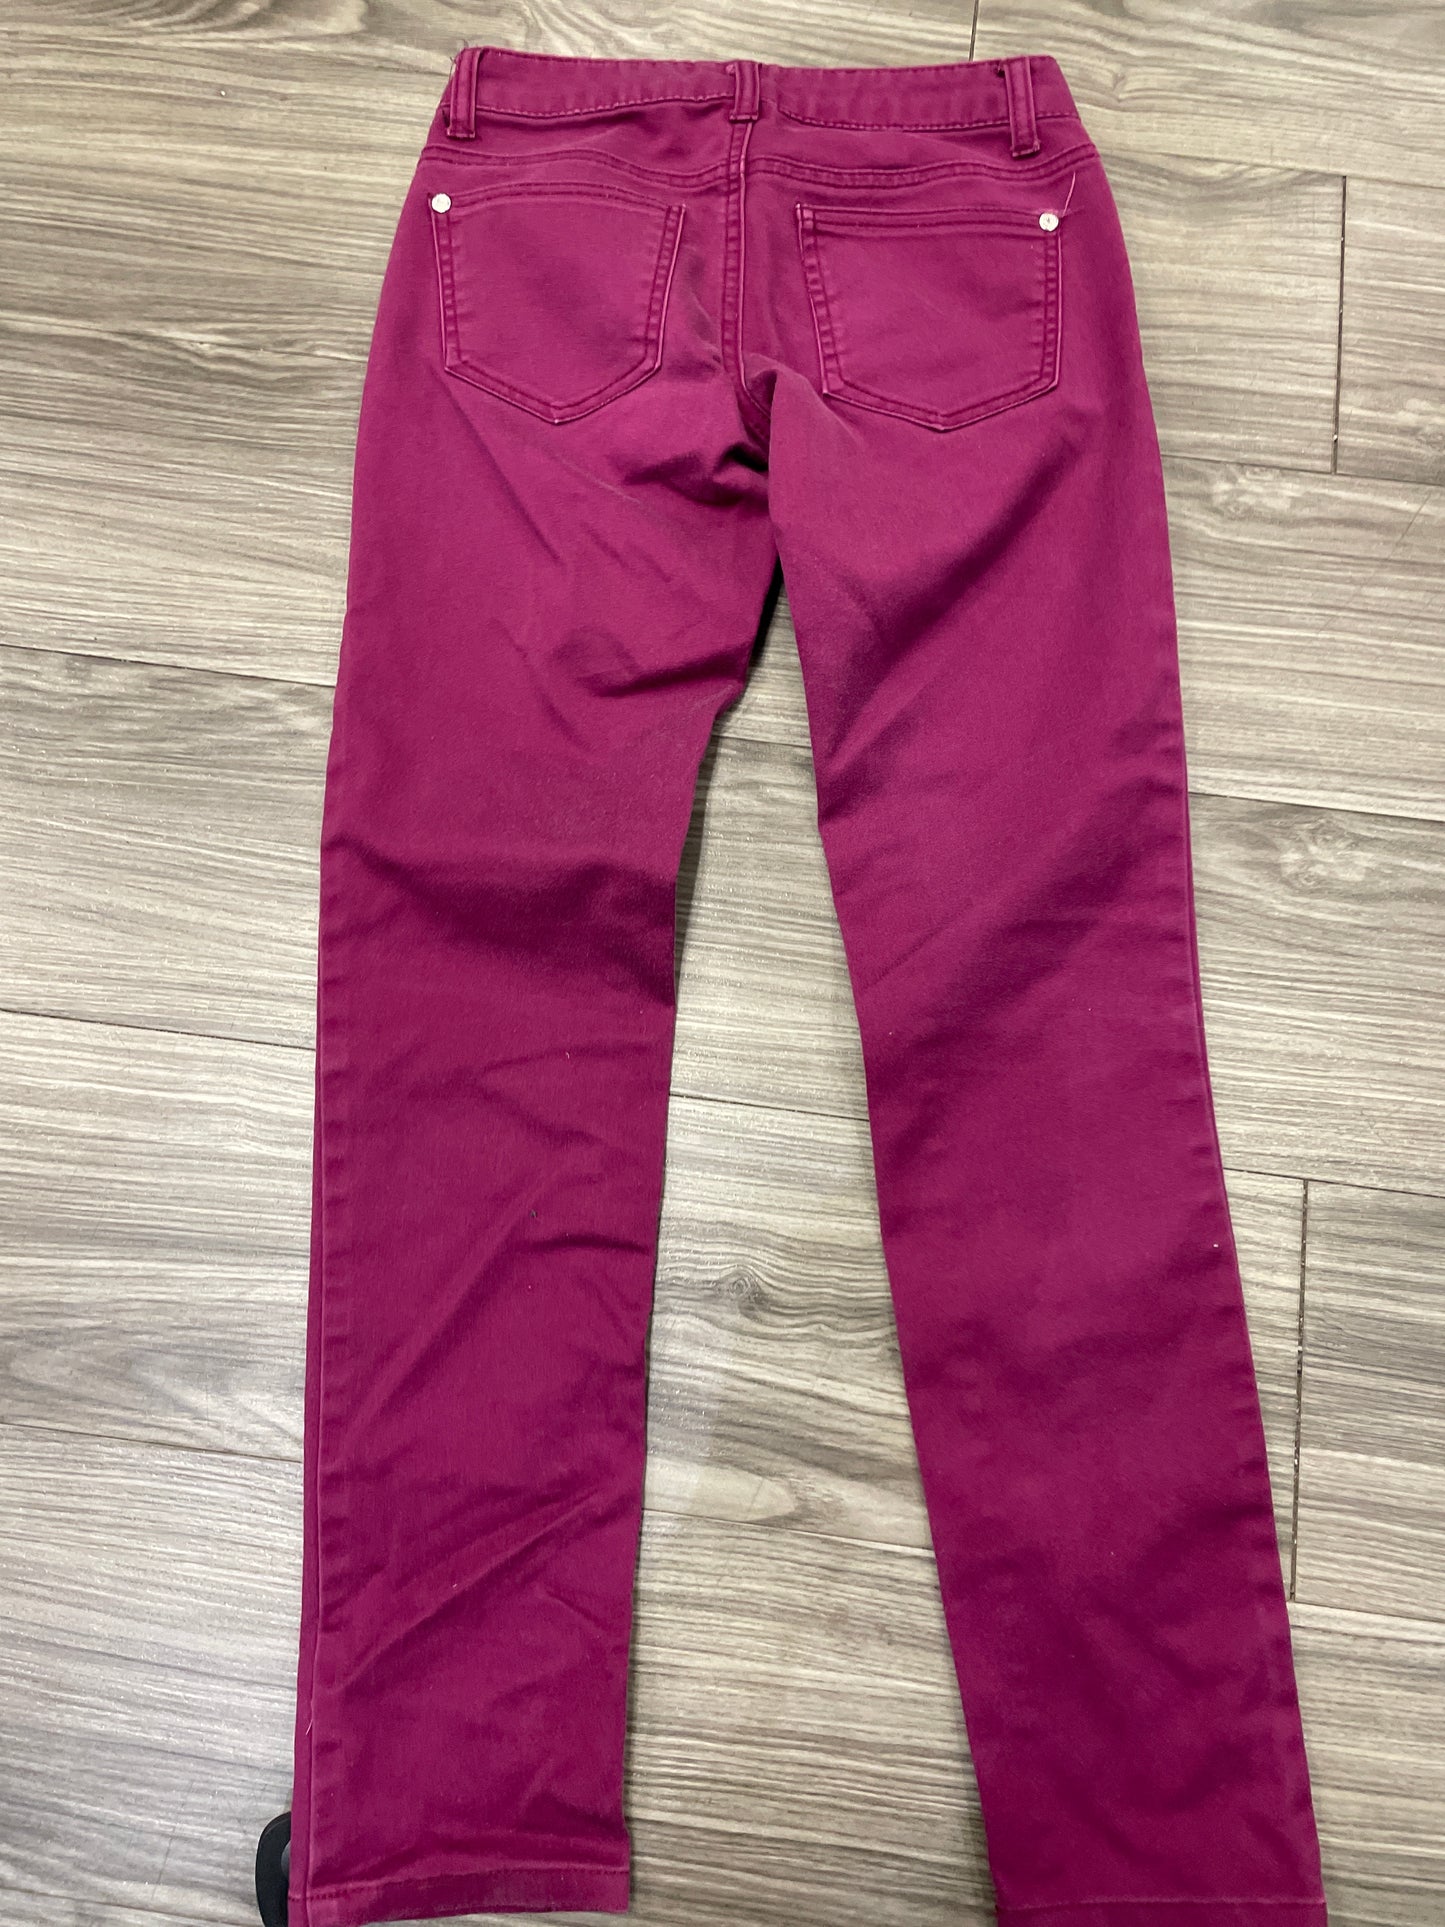 Jeans Straight By Celebrity Pink  Size: 0